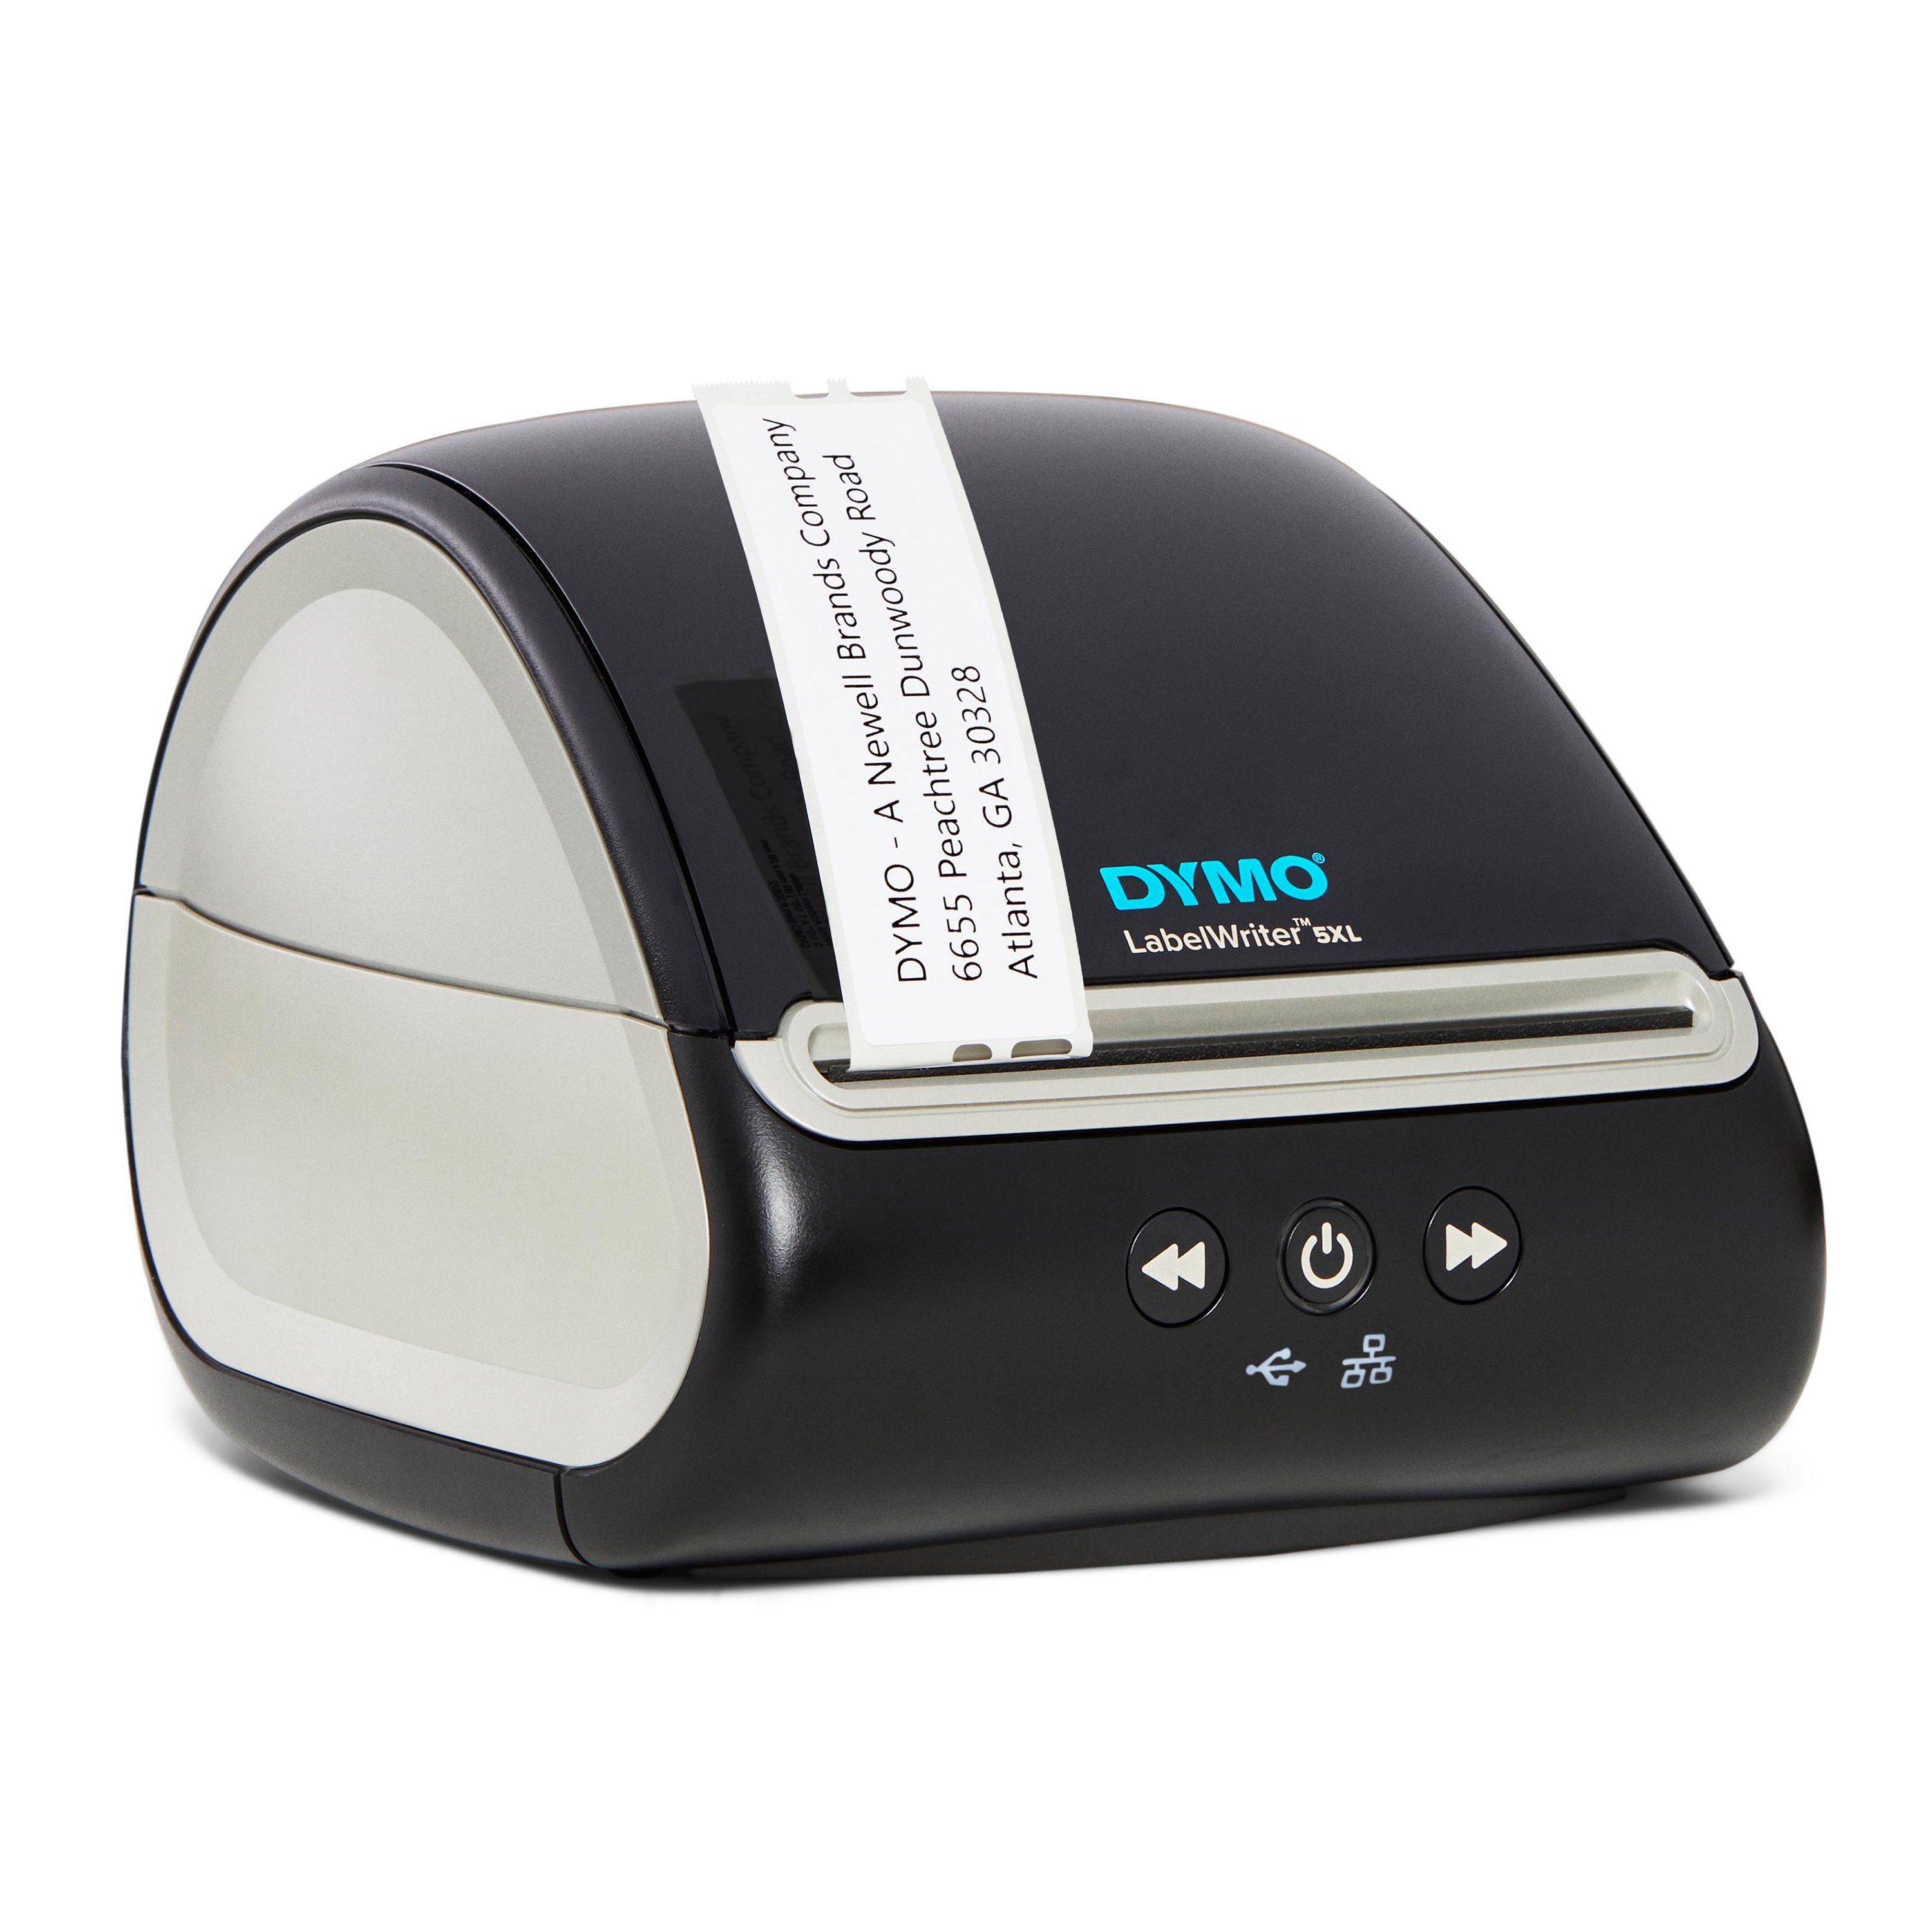 Dymo LabelWriter 450 Label Thermal Printer Black and White for sale online 